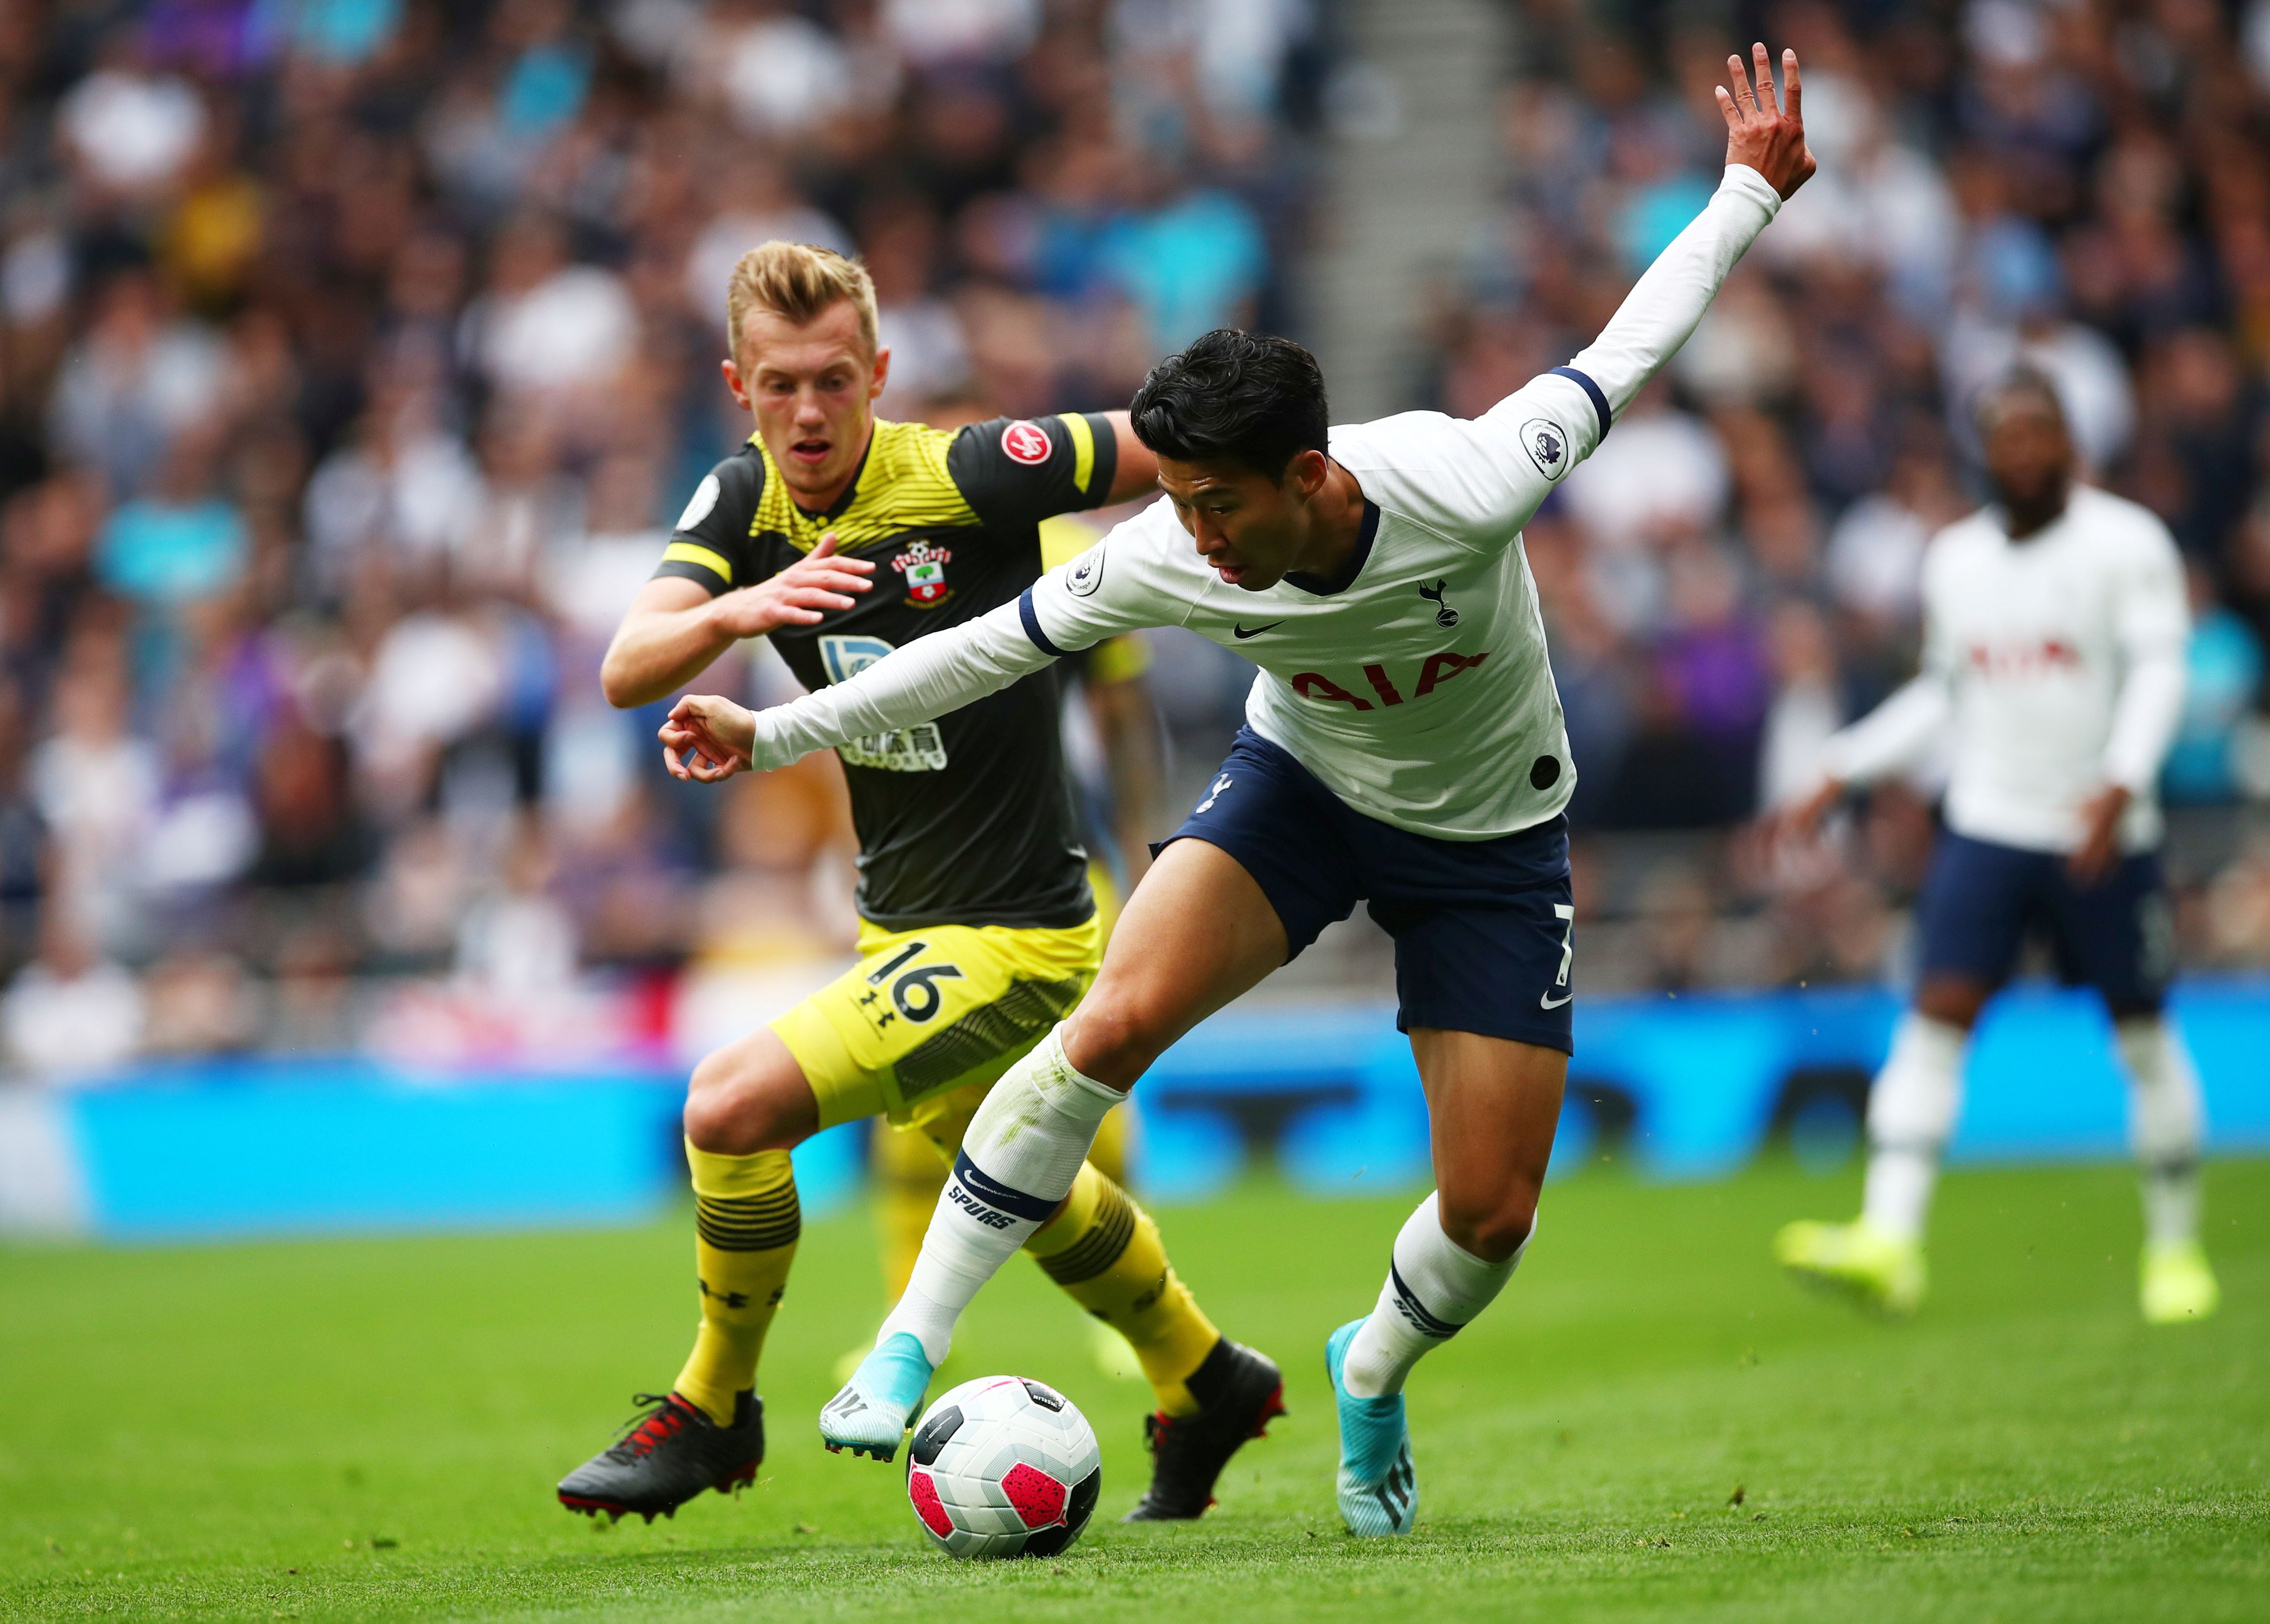 Tottenham Hotspur's Son Heung-min in action with Southampton's James Ward-Prowse